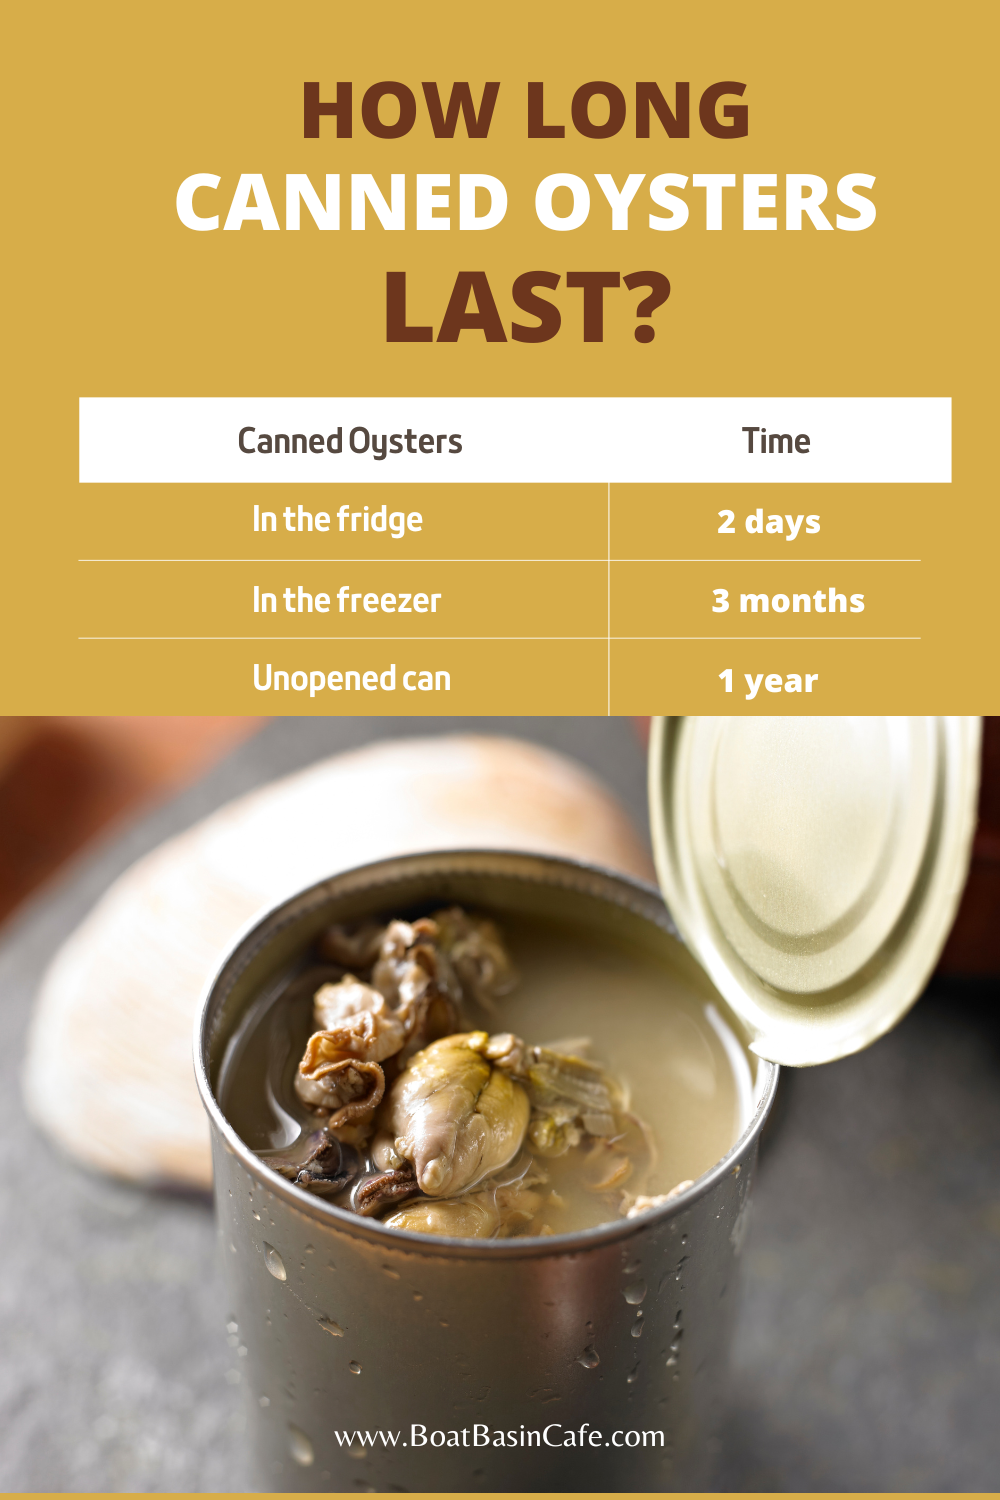 Do Canned Oysters Go Bad?